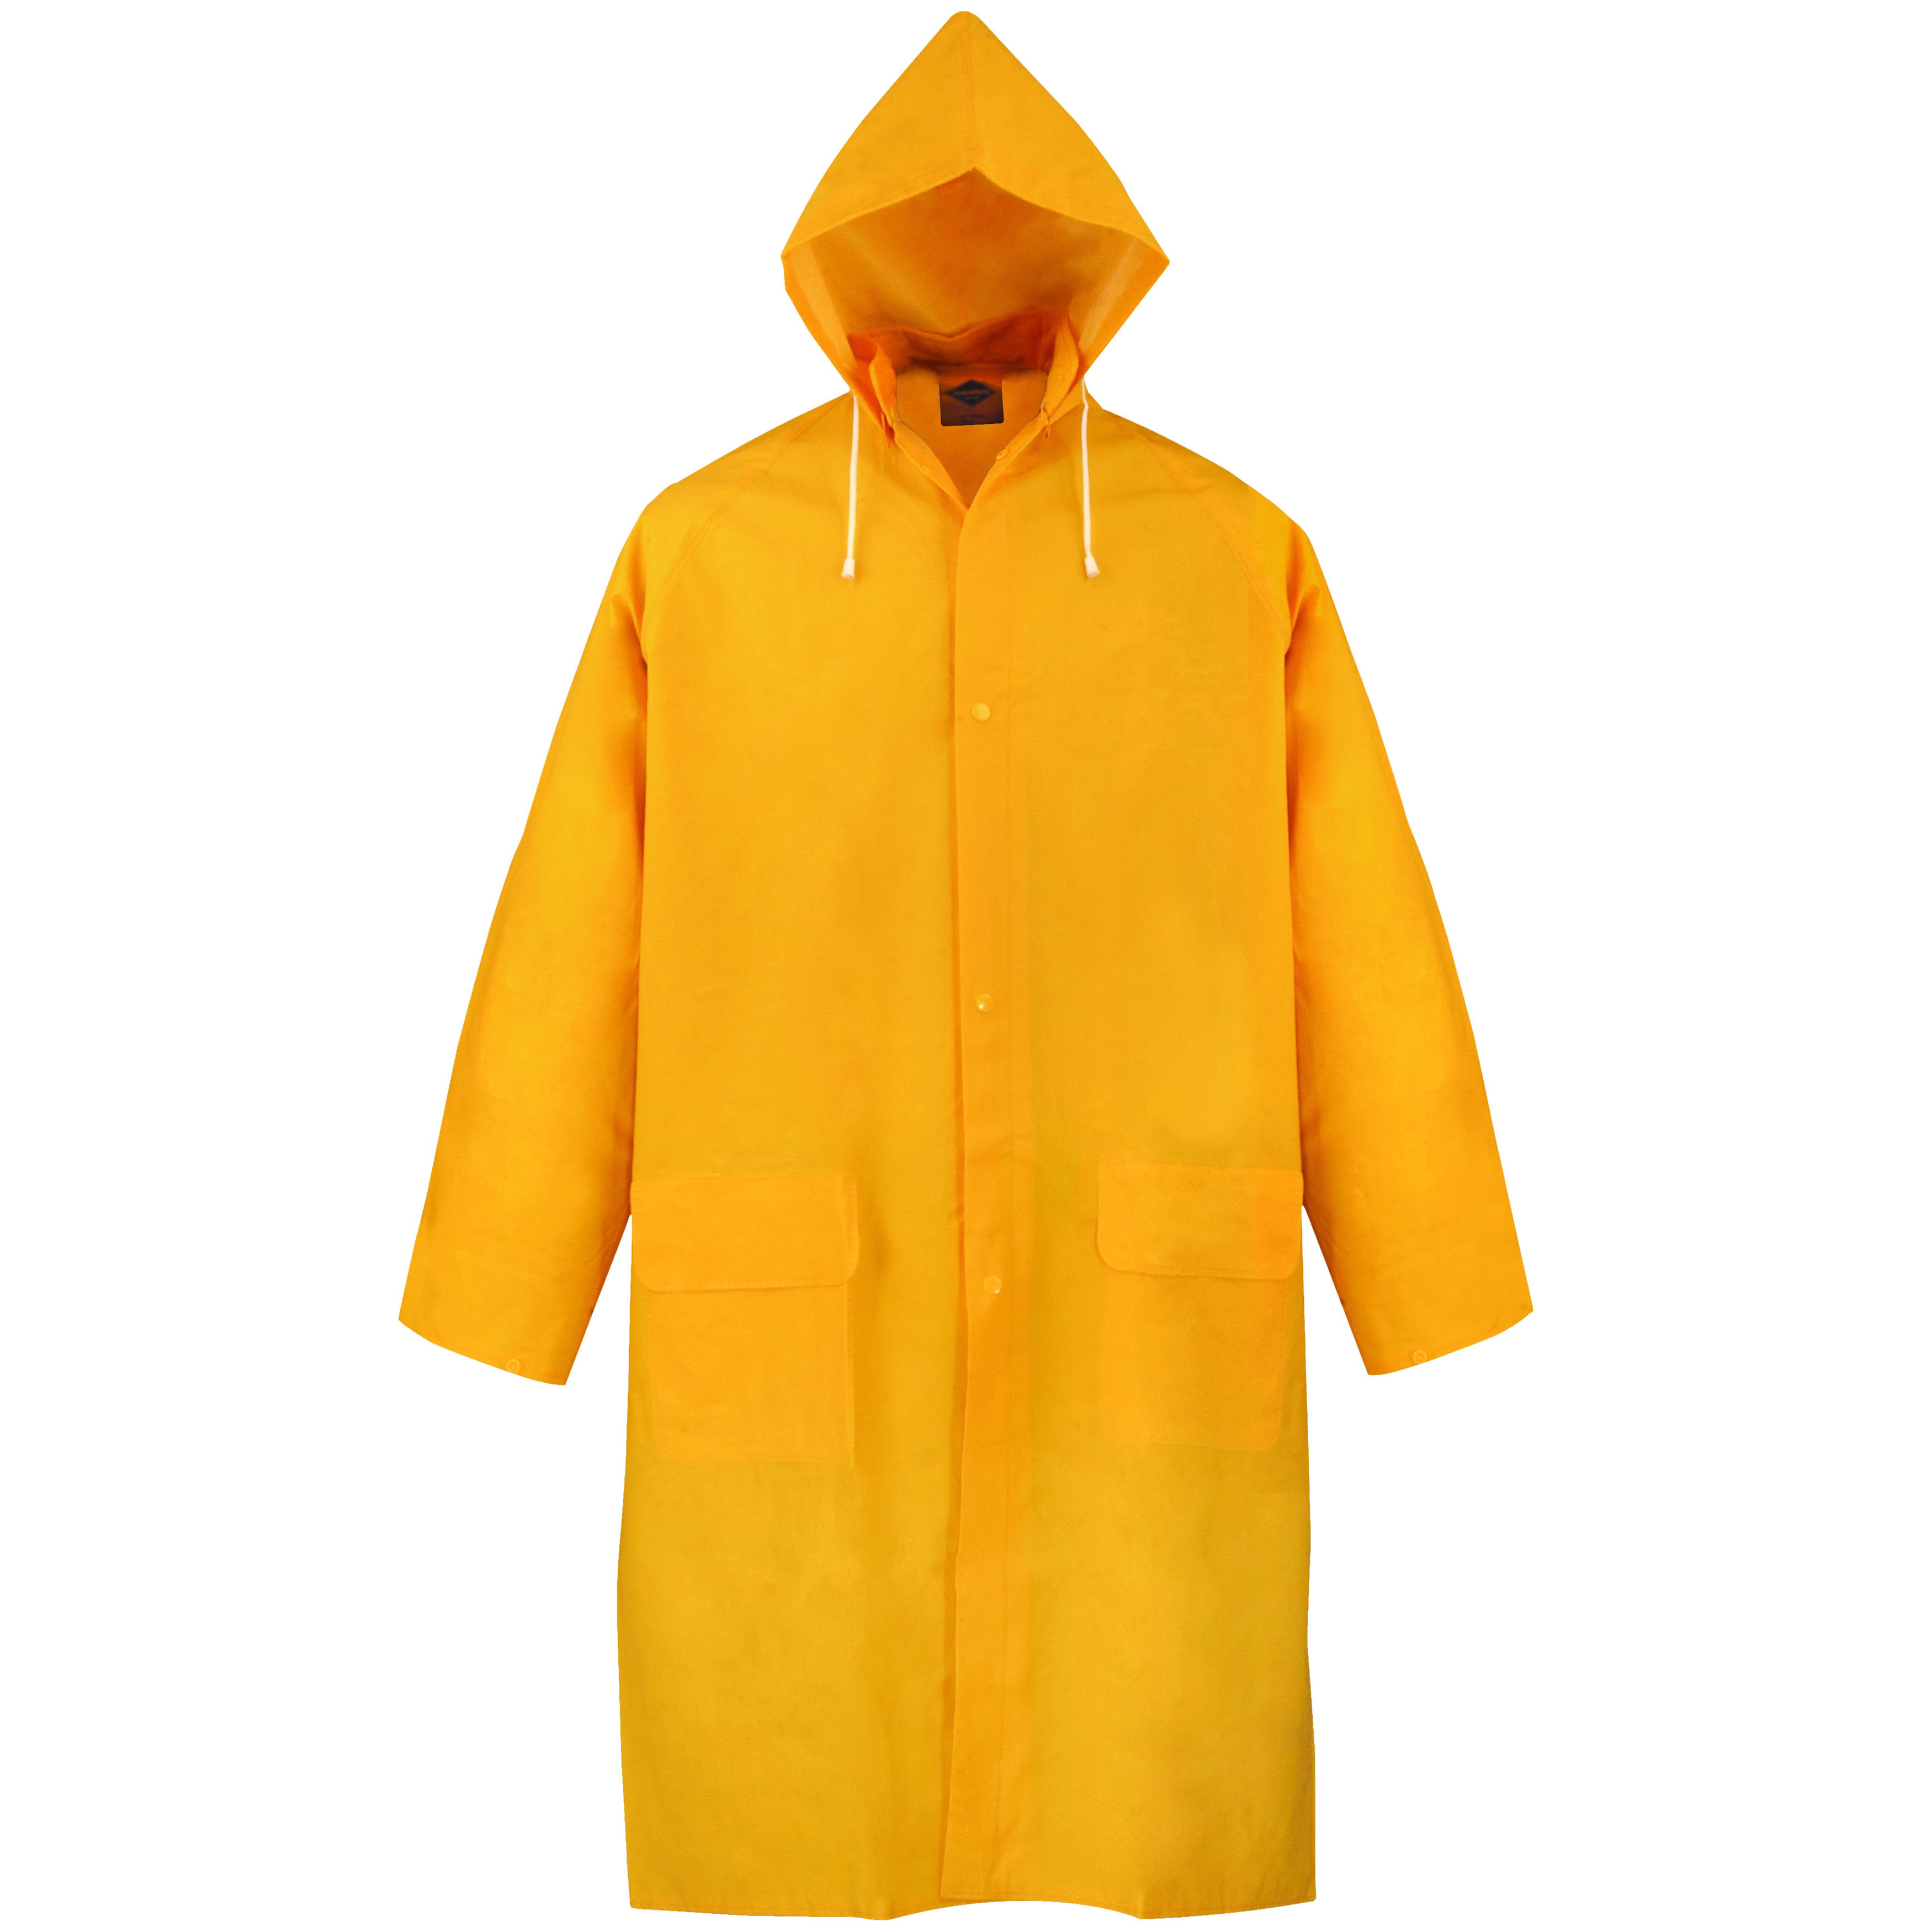 PY-800L Raincoat, L, Polyester/PVC, Yellow, Comfortable Corduroy Collar, Double Fly Snap Closure, Knee